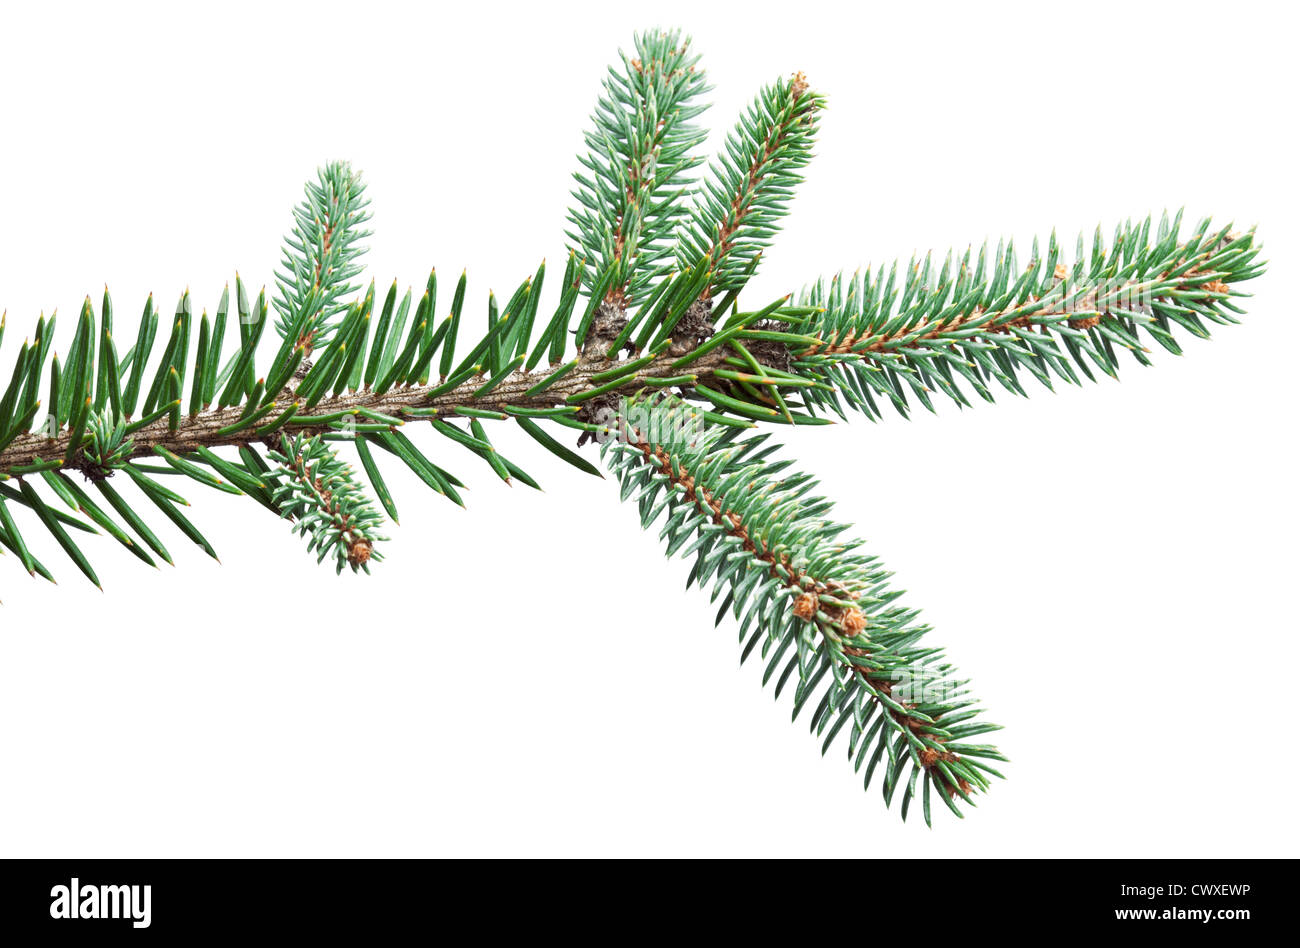 Fir branch on a white background. Stock Photo